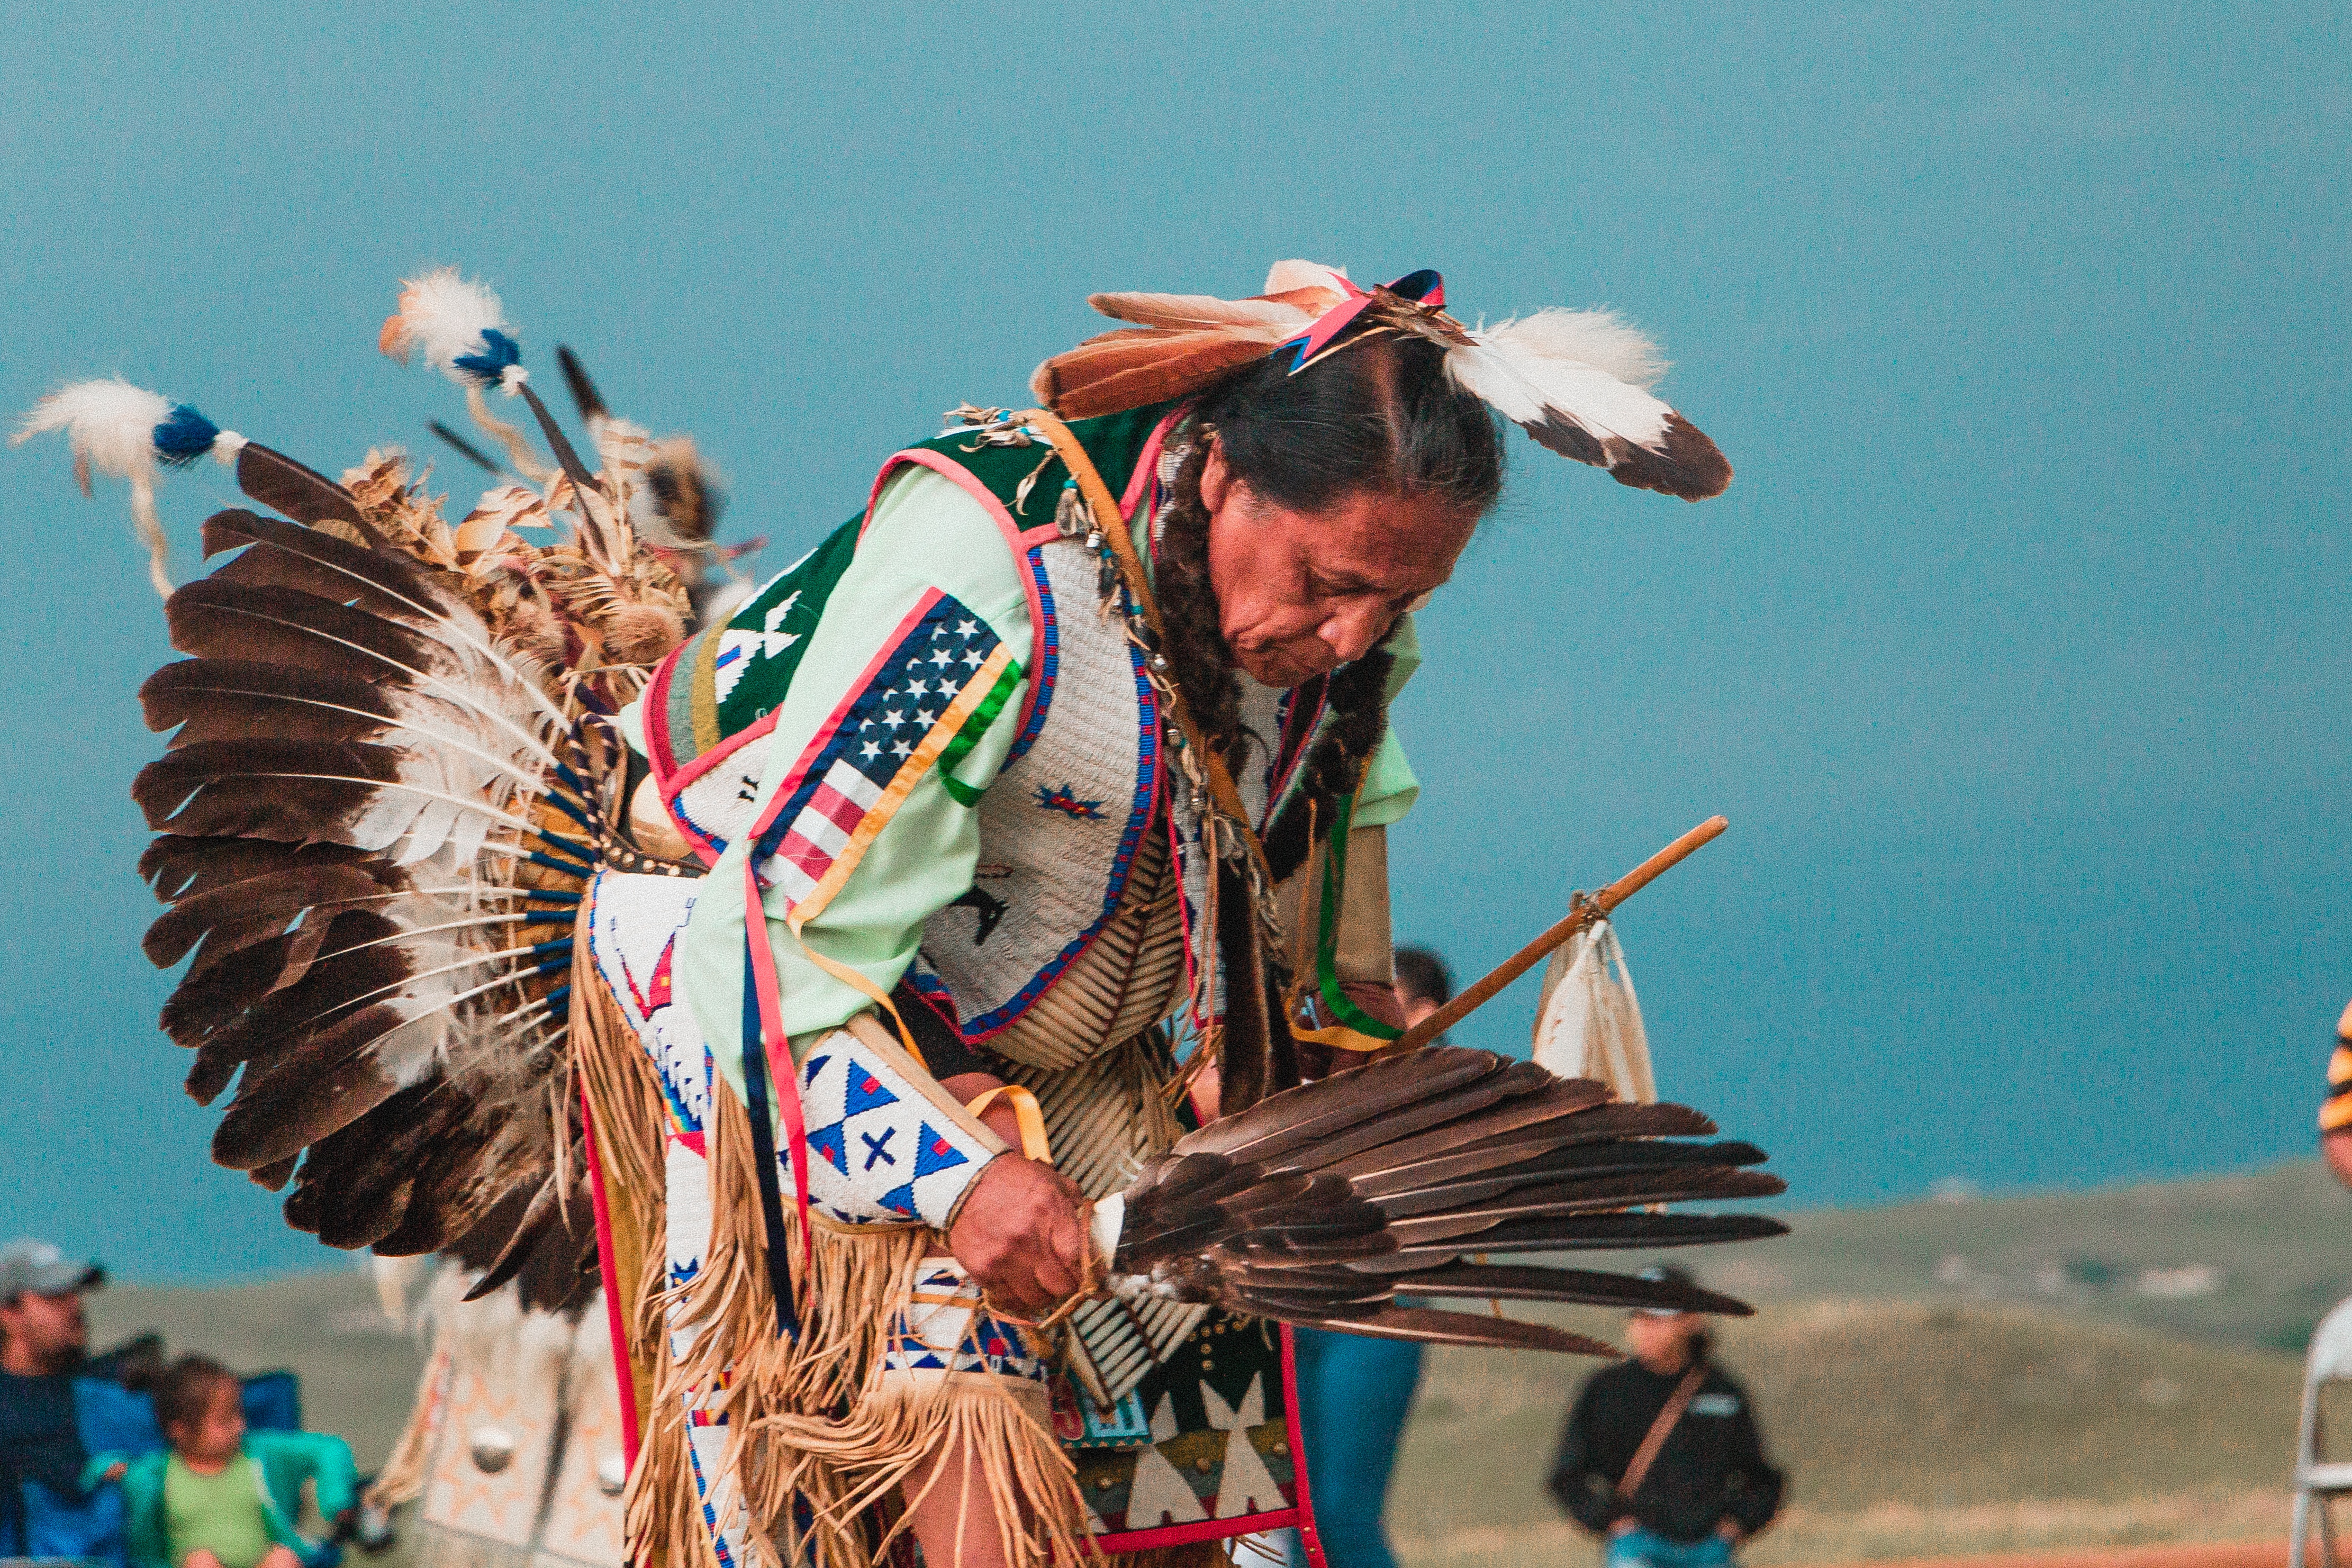 An indigenous North American of the Lakota tribe at a Pow Wow festival in South Dakota.